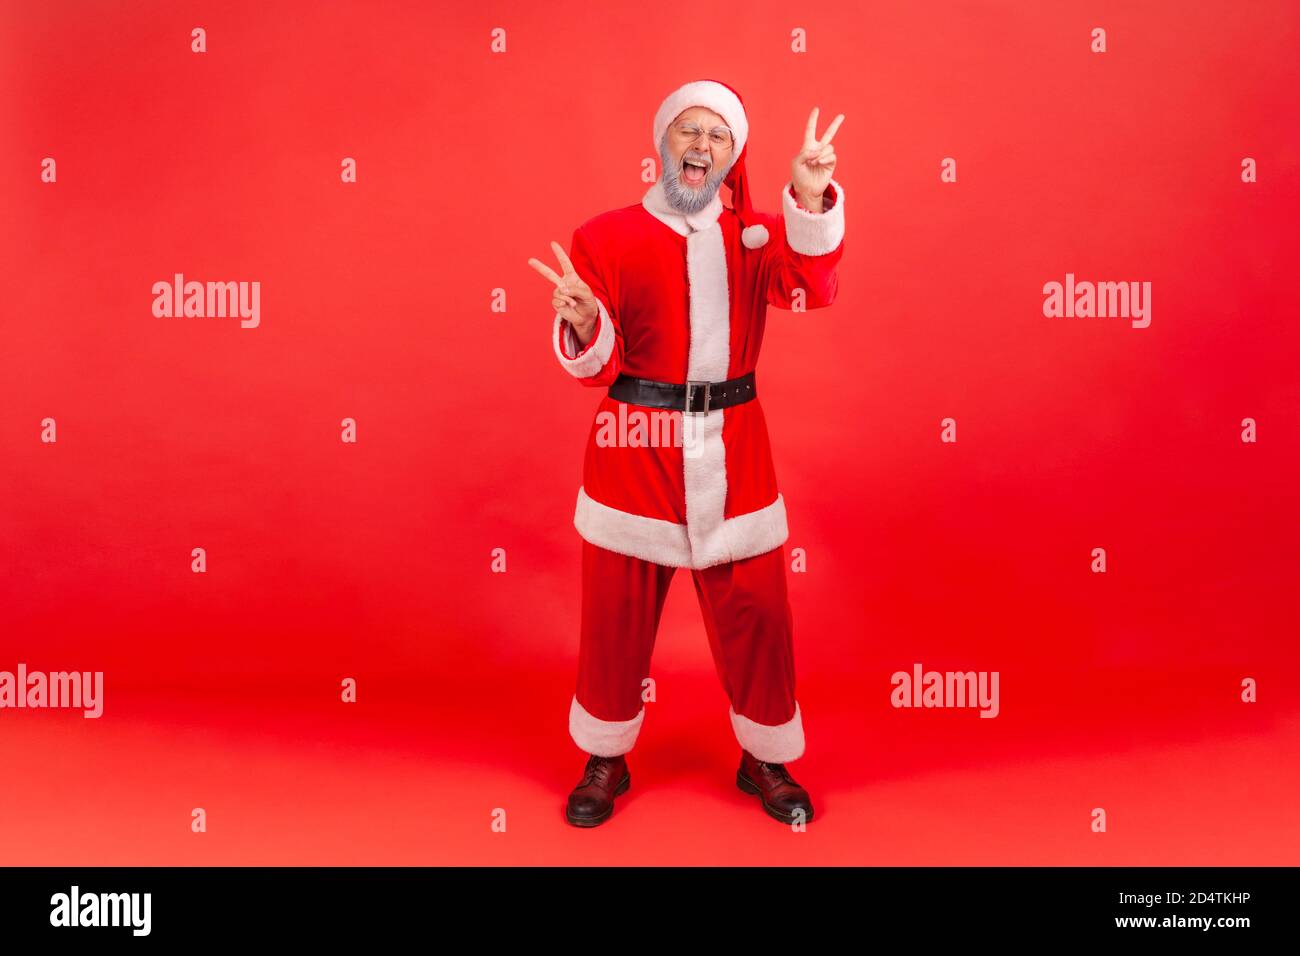 Full length portrait of positive funny gray bearded man in santa claus costume winking showing peace gesture with fingers, free and optimistic waiting Stock Photo